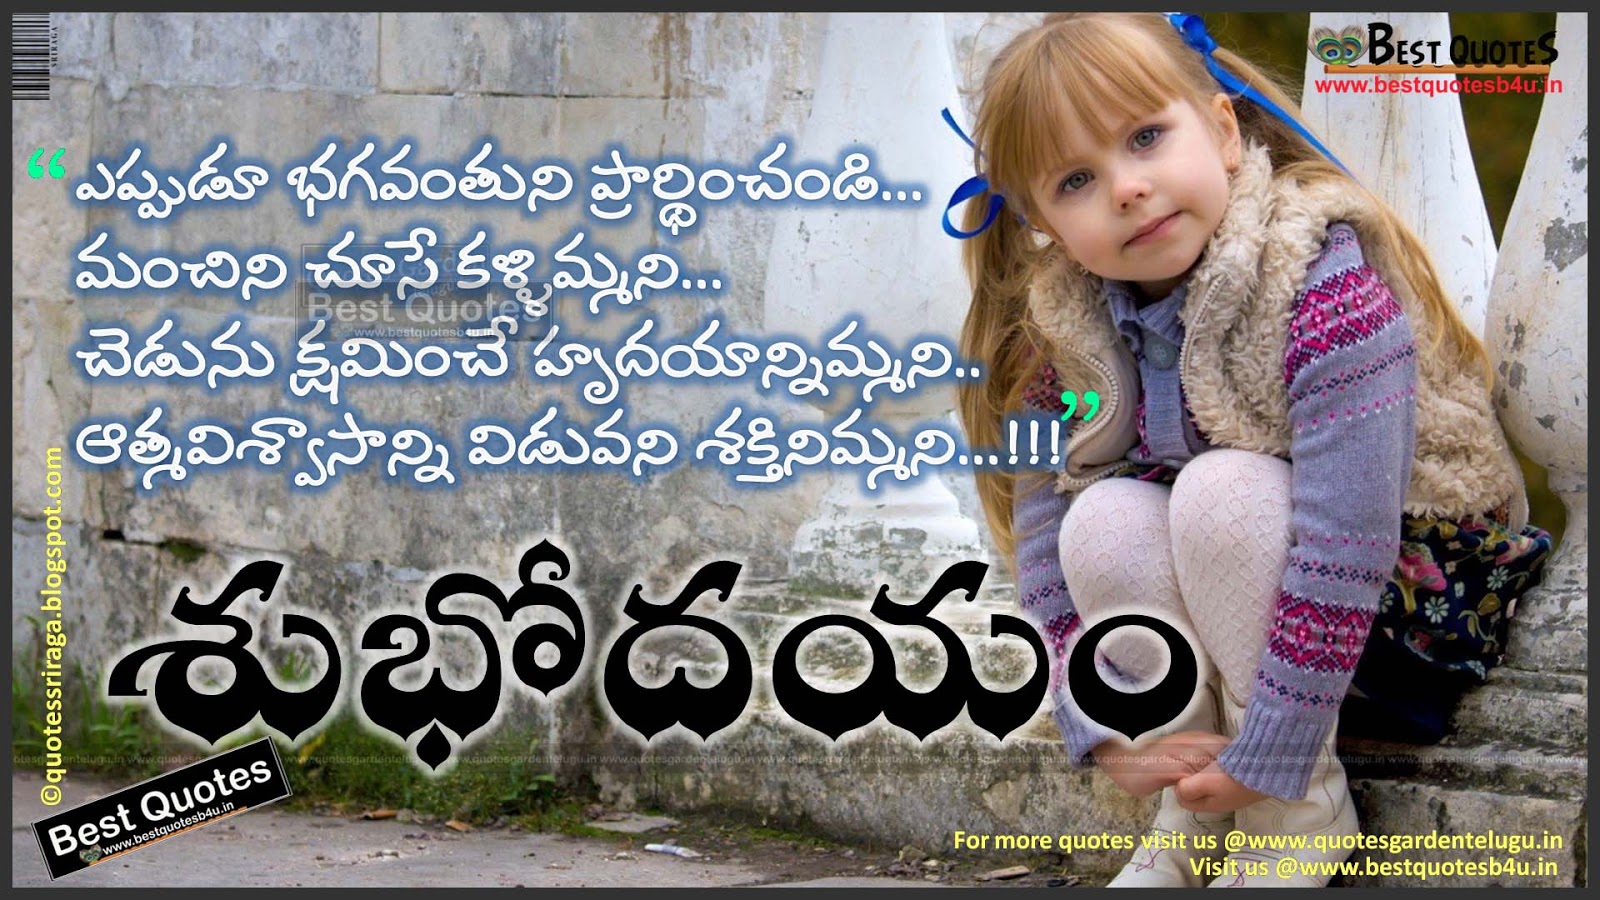 Telugu good morning sms with nice quotes for friends | Like Share ...